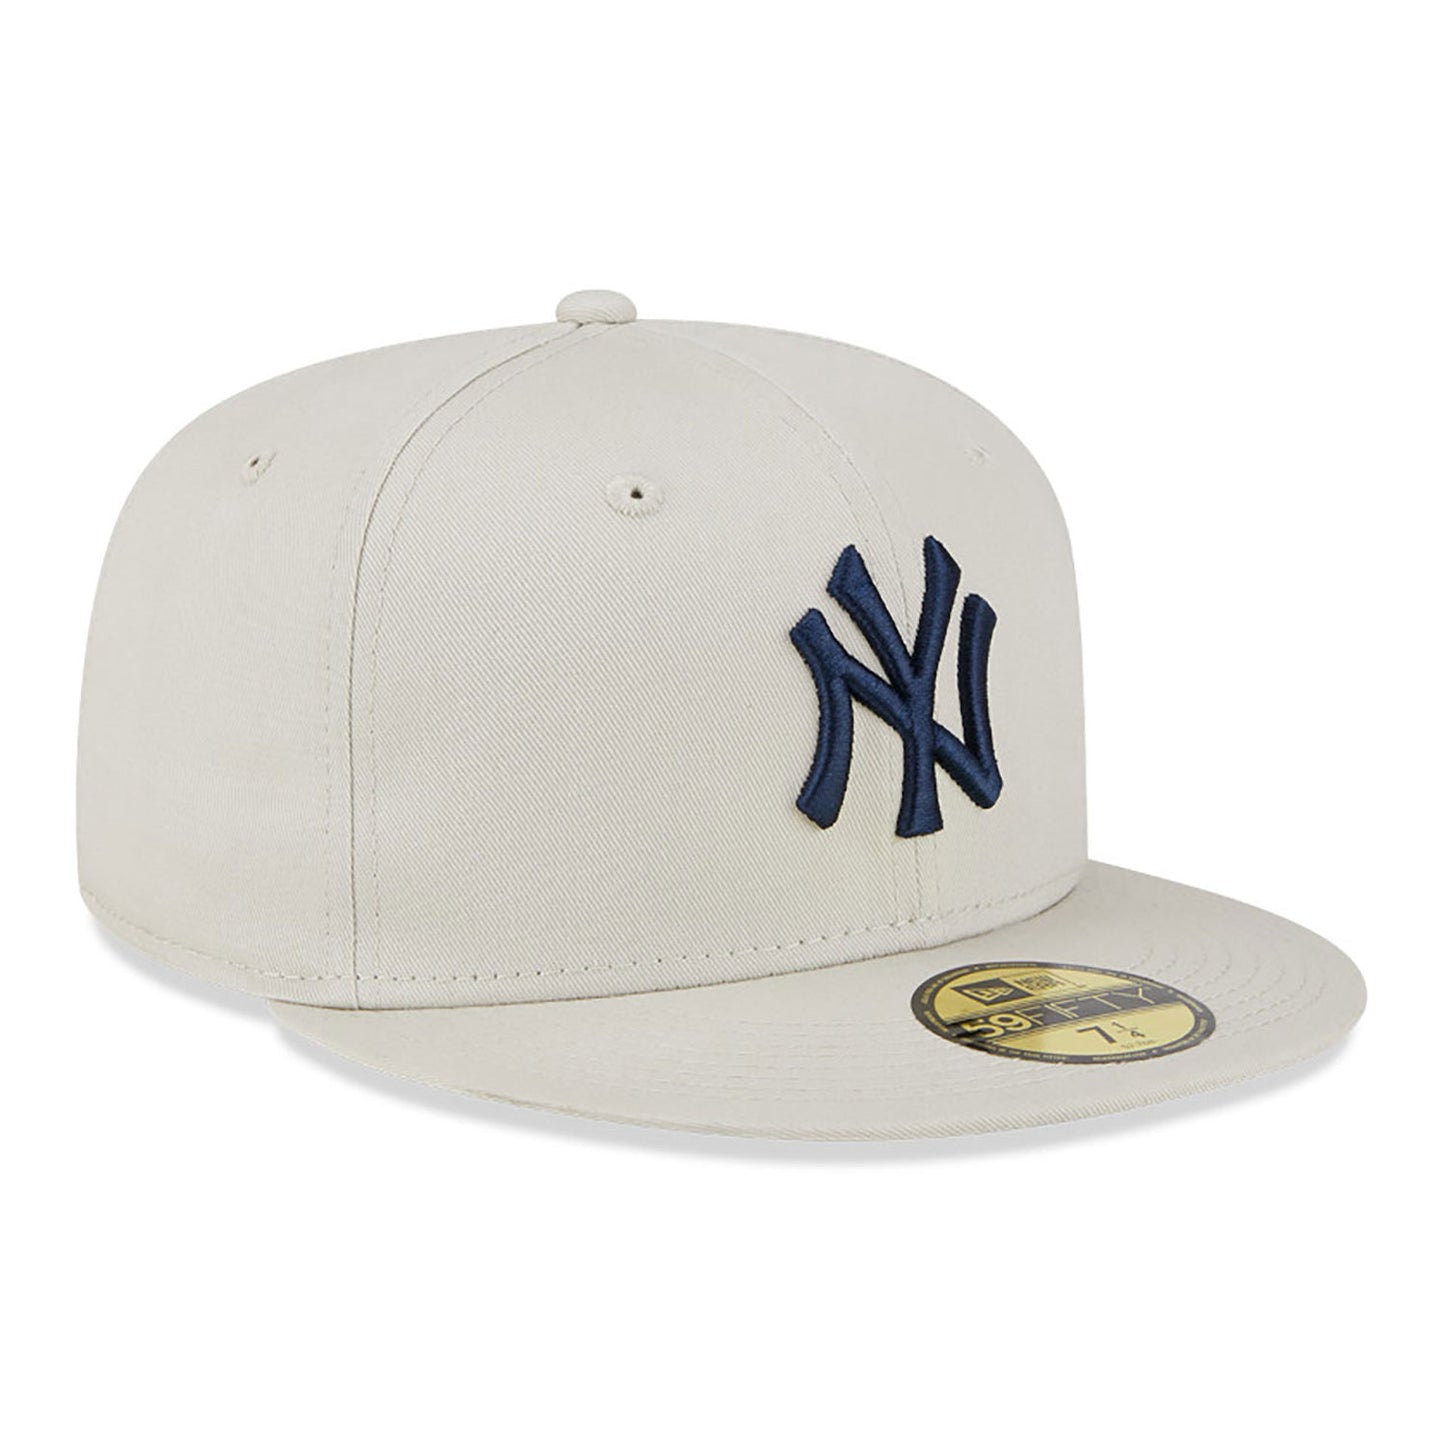 NEW ERA New York Yankees League Essential Stone 59FIFTY Fitted Cap